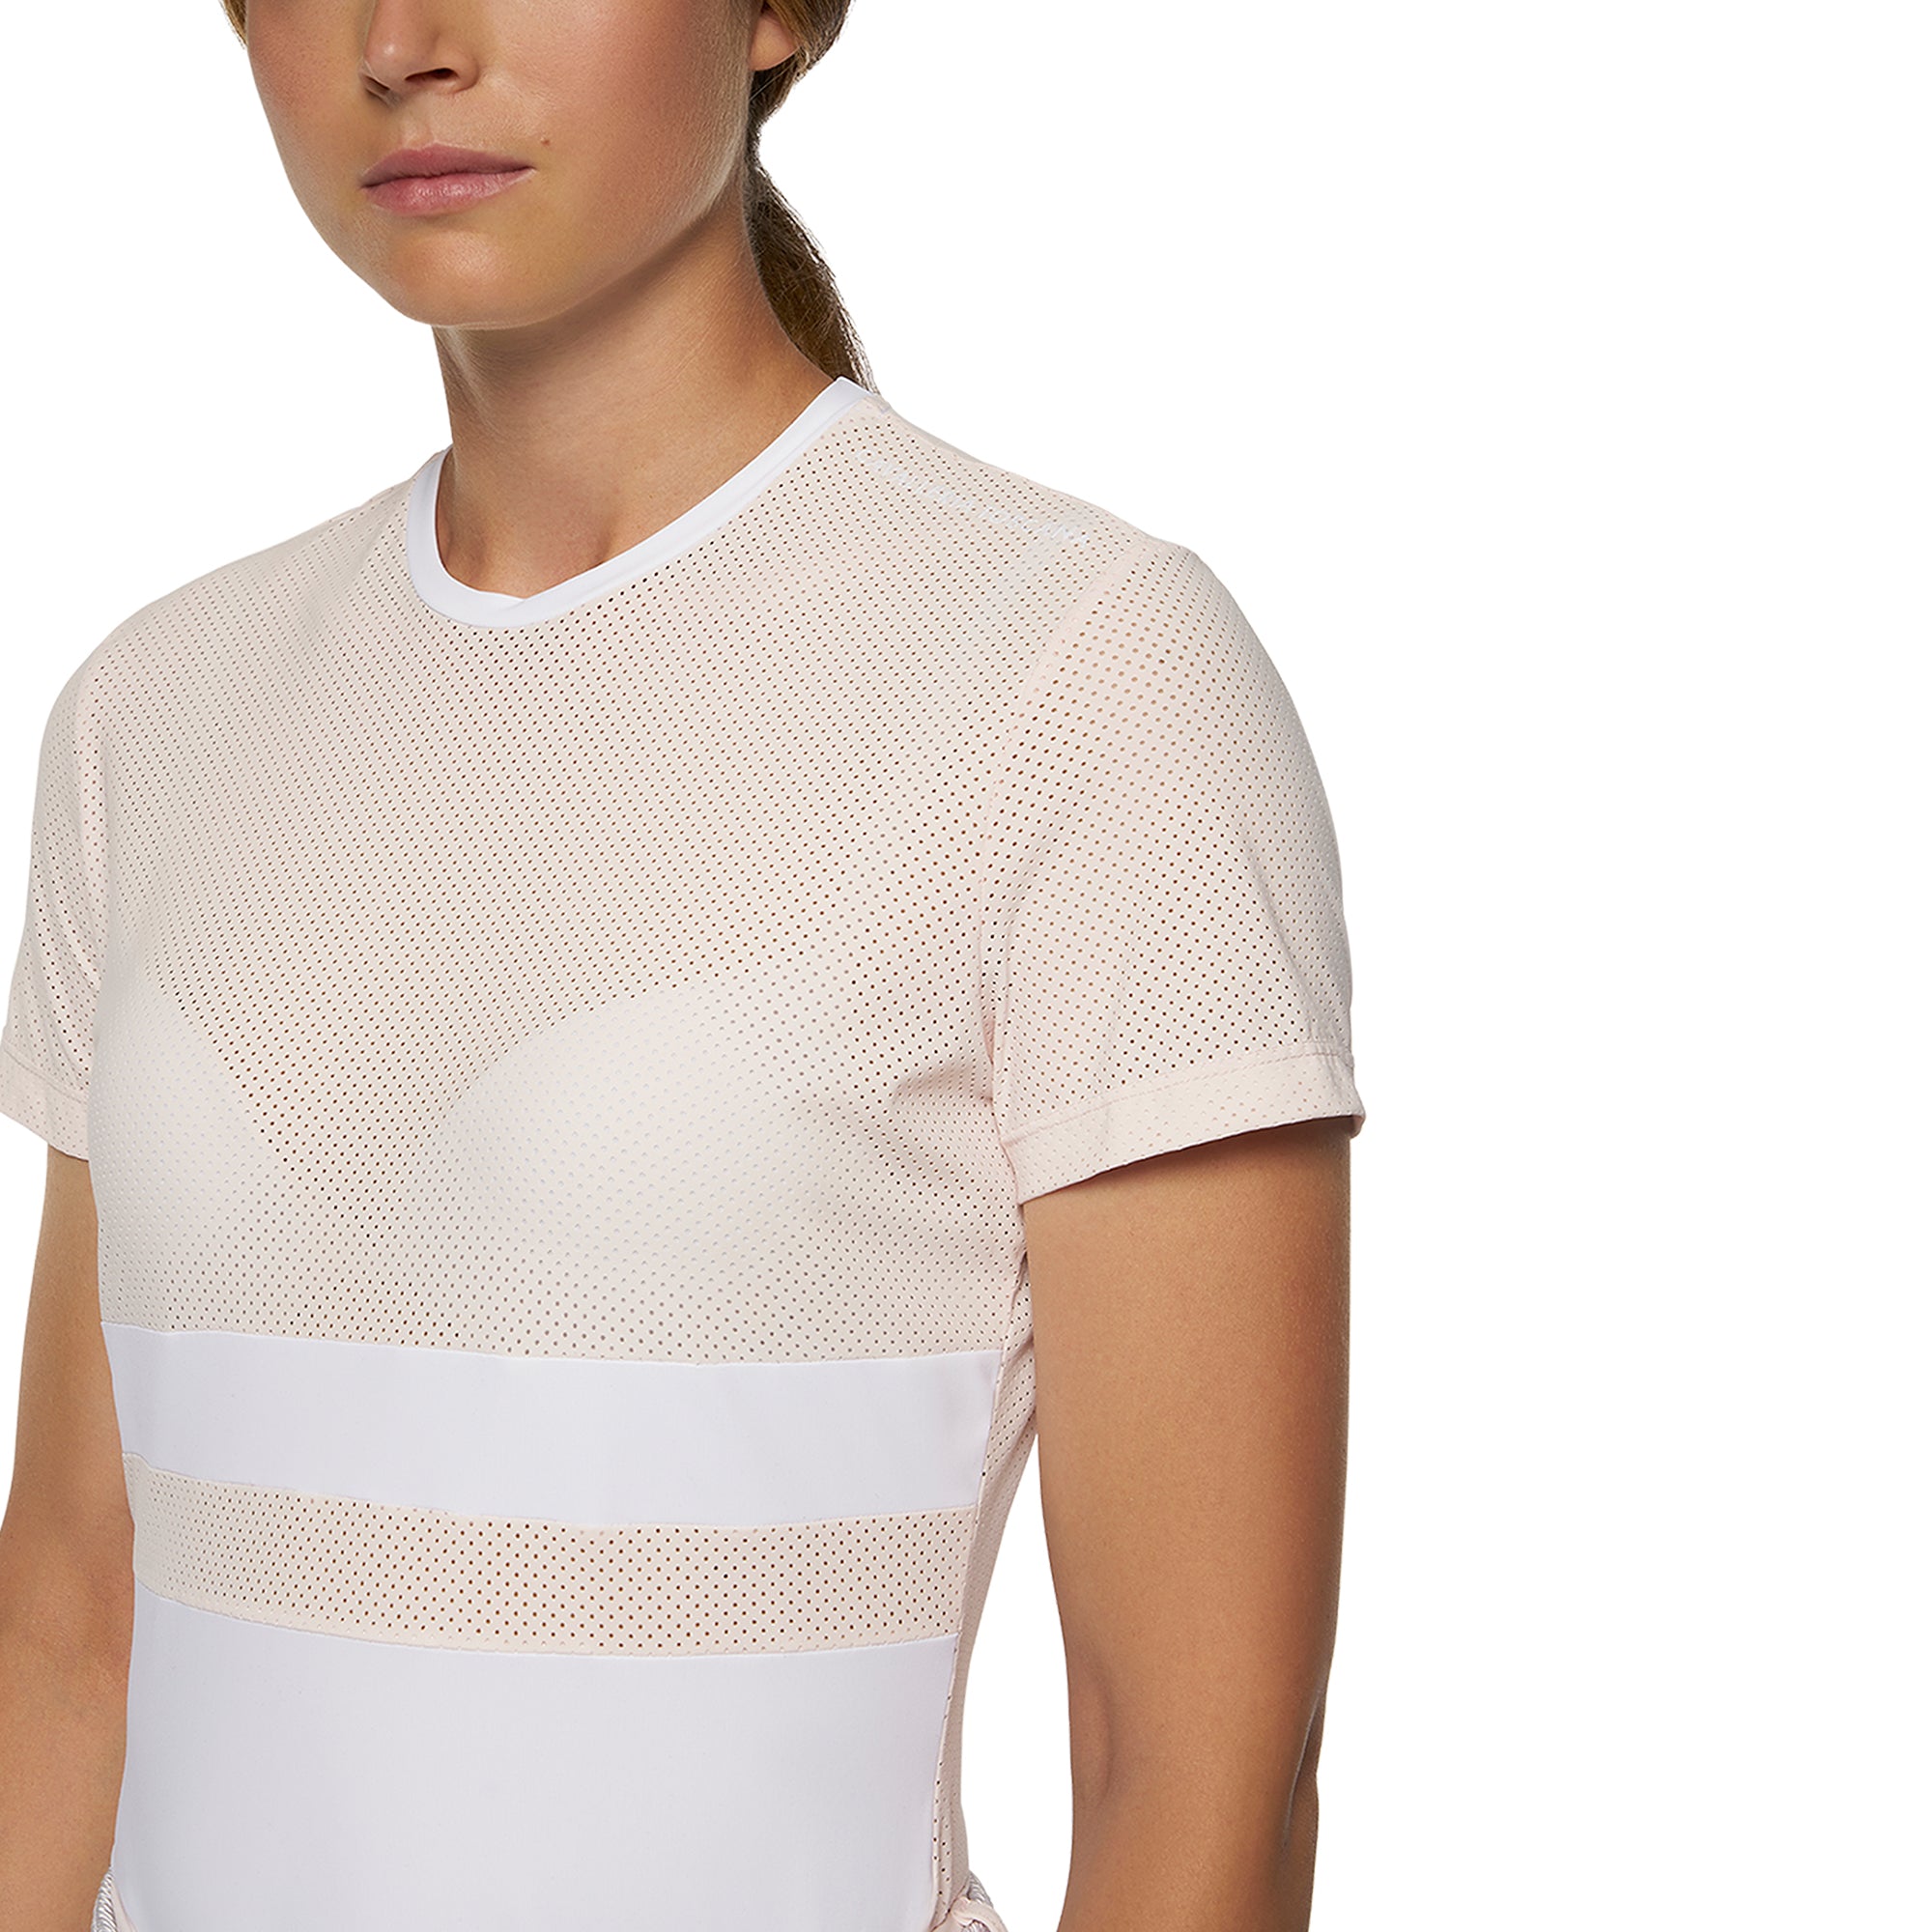 Cavalleria Toscana crew neck tshirt in perforated jersey - Pink